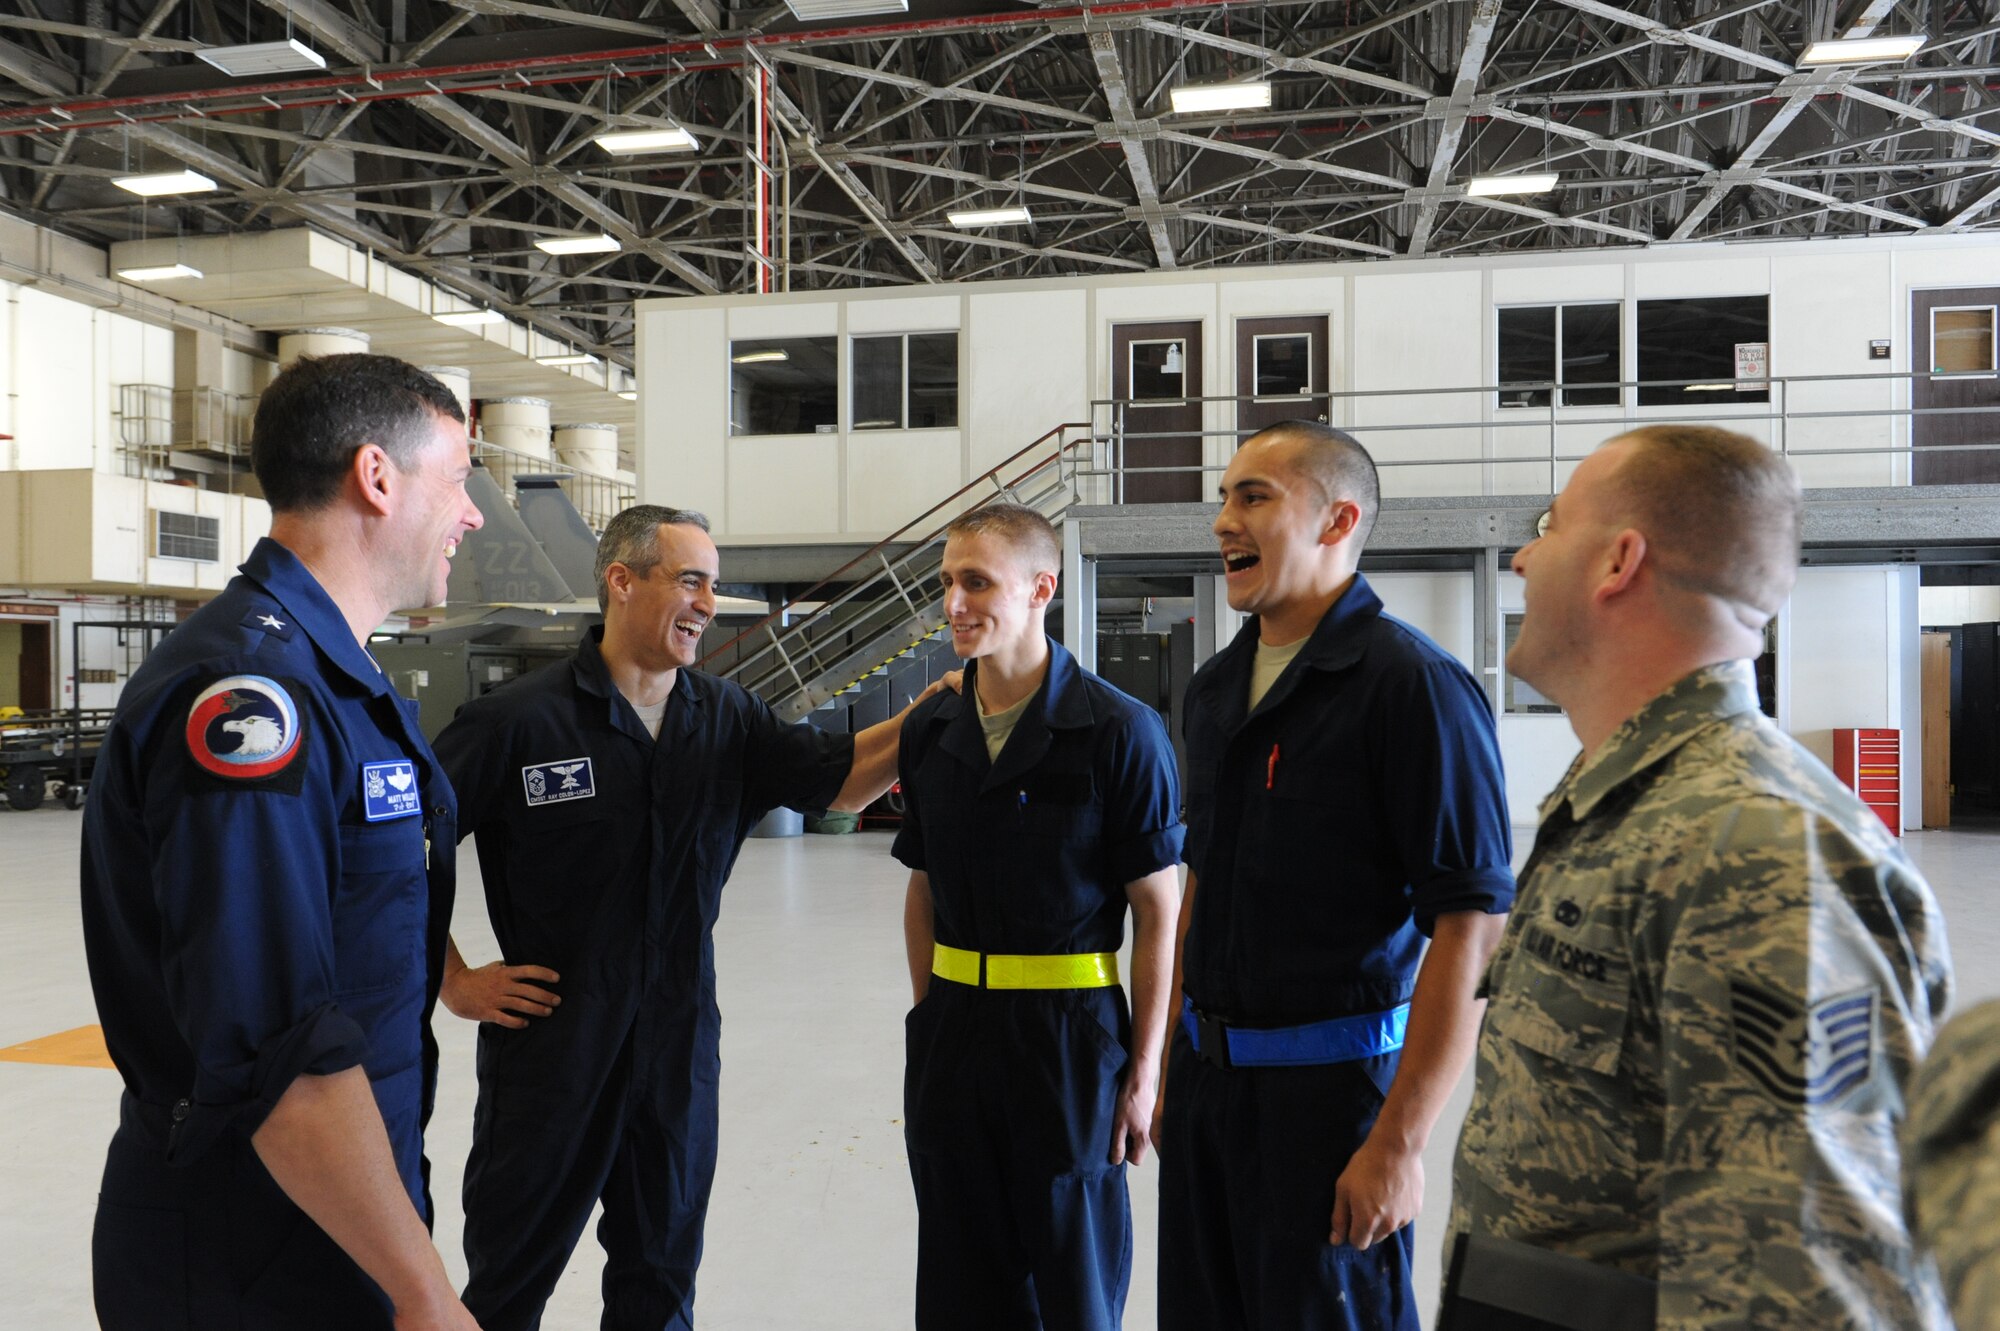 U.S. Air Force Brig. Gen. Matt Molloy, 18th Wing commander, and Chief Master Sgt. Ramon Colon-Lopez, 18th Wing command chief, interact with Airmen from the 18th Equipment Maintenance Squadron on Kadena Air Base, Japan, March 7, 2013. The Airmen briefed Kadena’s leadership about the proper safety precautions they would need to take before working on a U.S. Air Force F-15 Eagle fighter aircraft. (U.S. Air Force photo/Airman 1st Class Malia Jenkins)